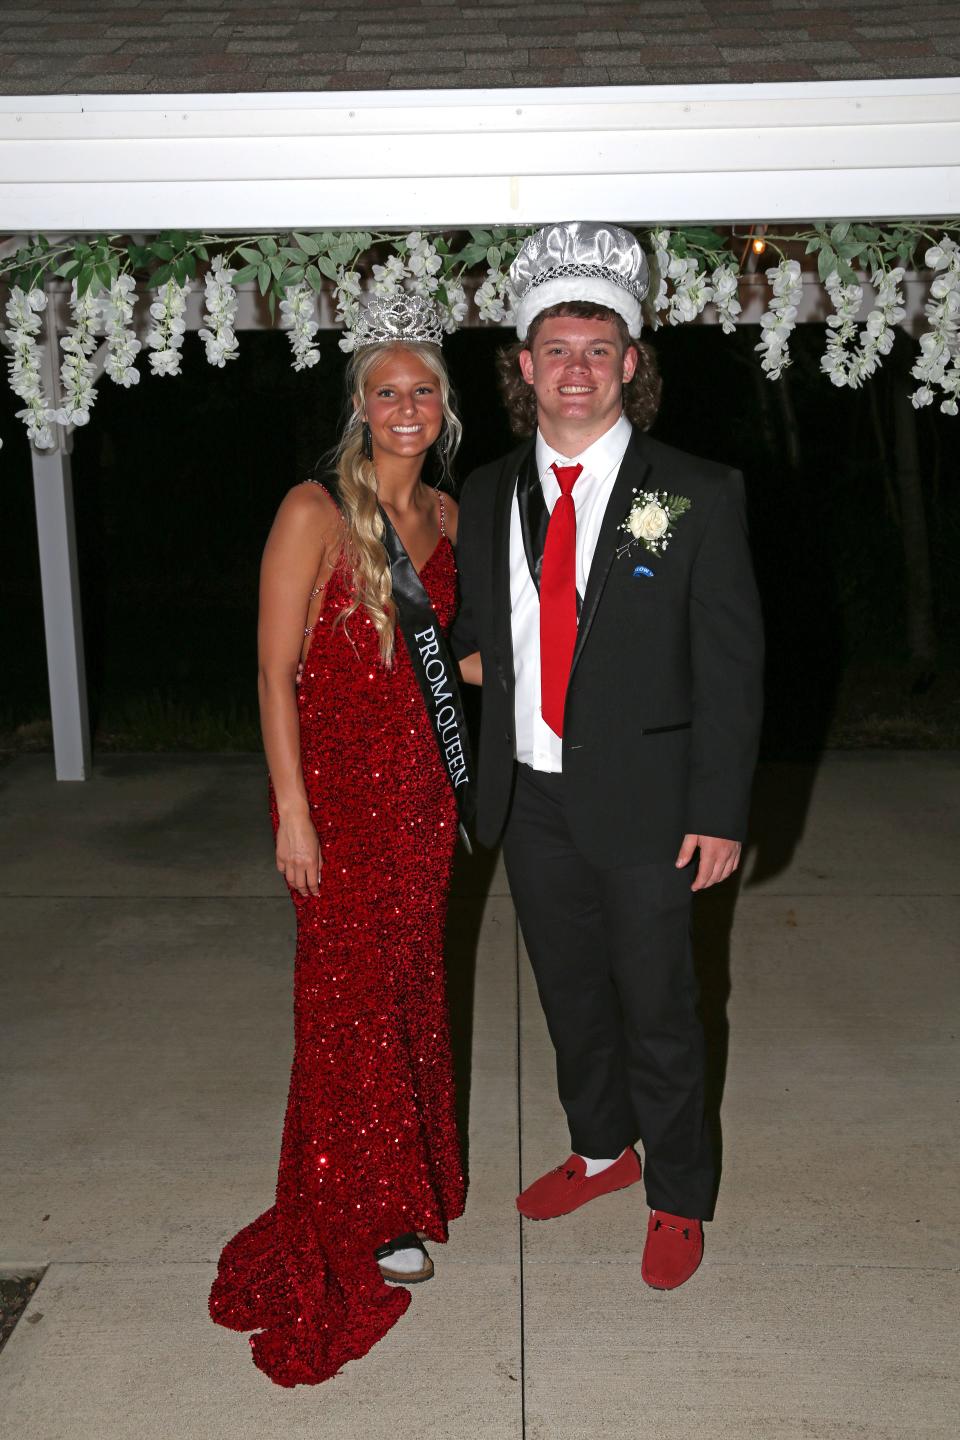 Katelyn Maloy was crowned Queen and Dagan Meyers was crowned King, at Port Clinton's 2024 prom, held at Terra State's Neeley Center on April 27.